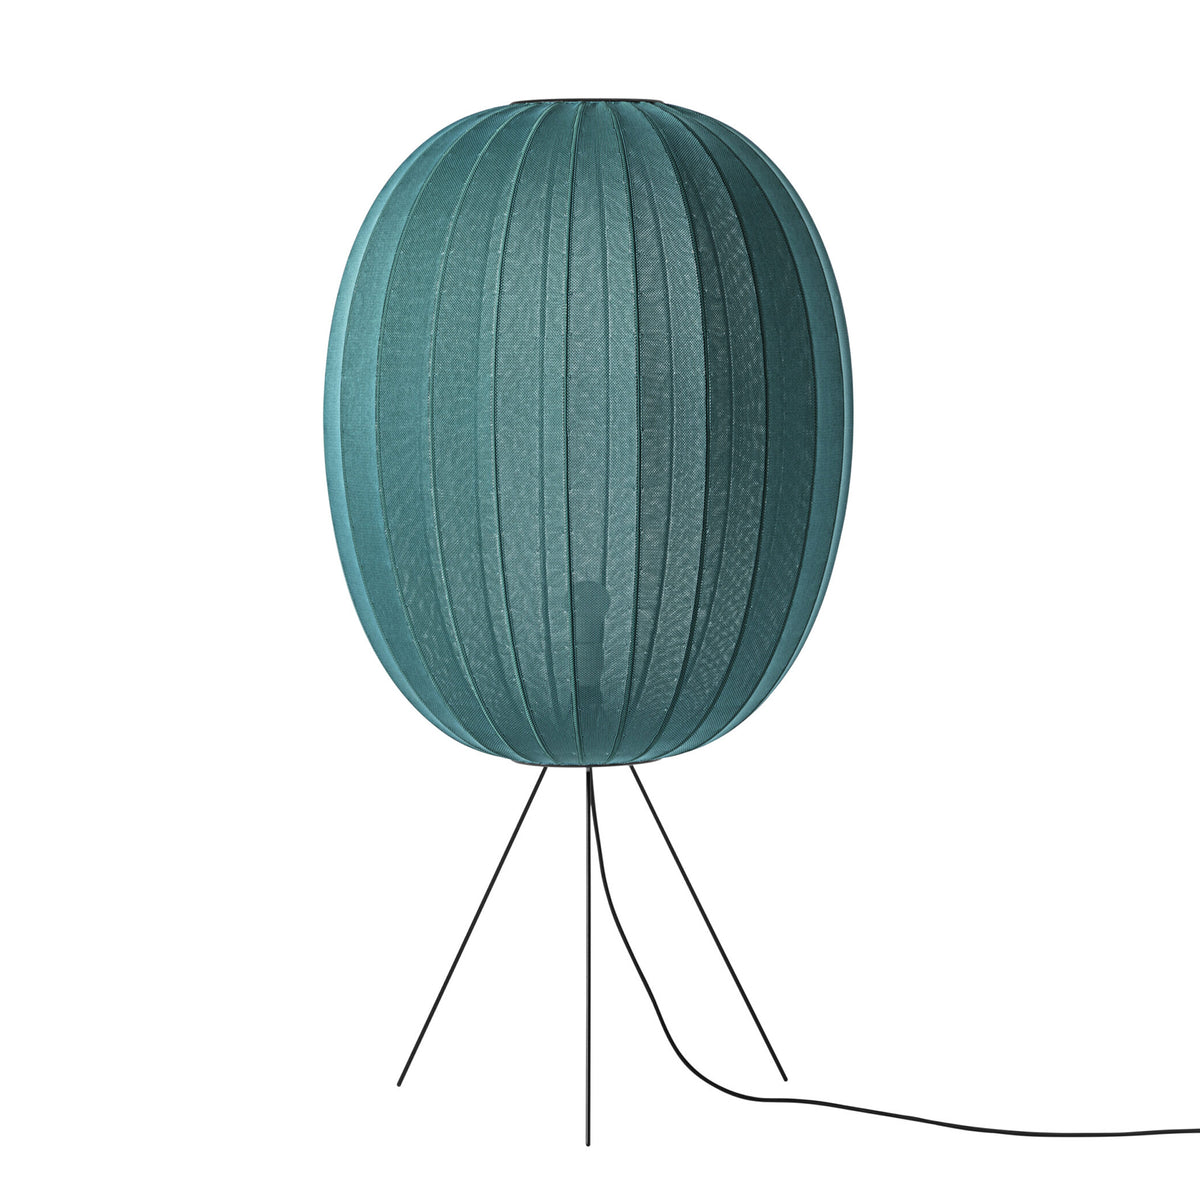 Made by Hand, Knit-Wit Medium Floor Lamp 65, Pearl White, Floor,